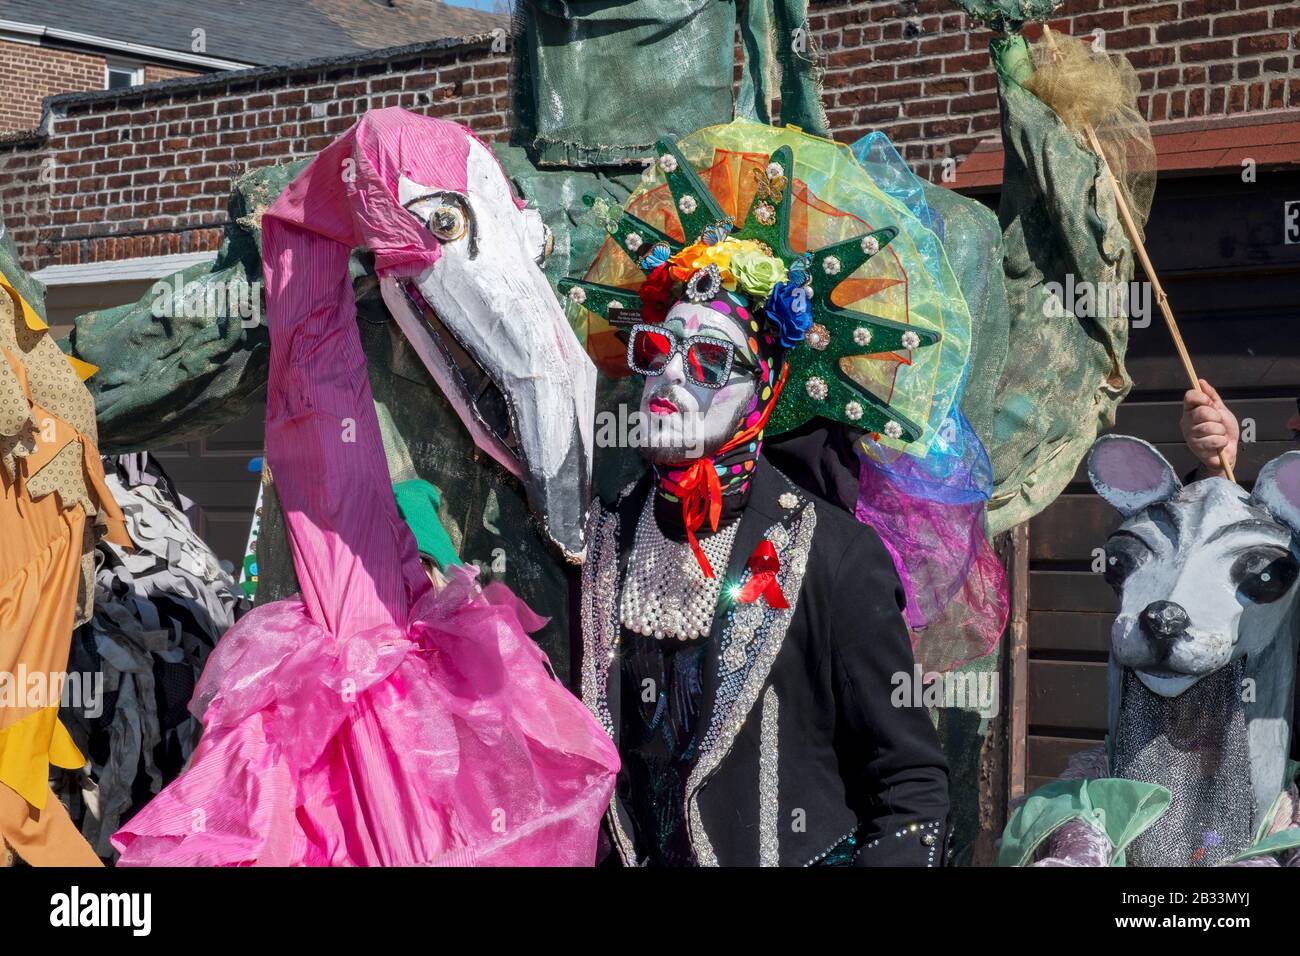 Sister Lotti Da, a performance artist and member of the Sisters of Indulgence poses with large oversized puppets. In Sunnyside, Queens, New York City. Stock Photo